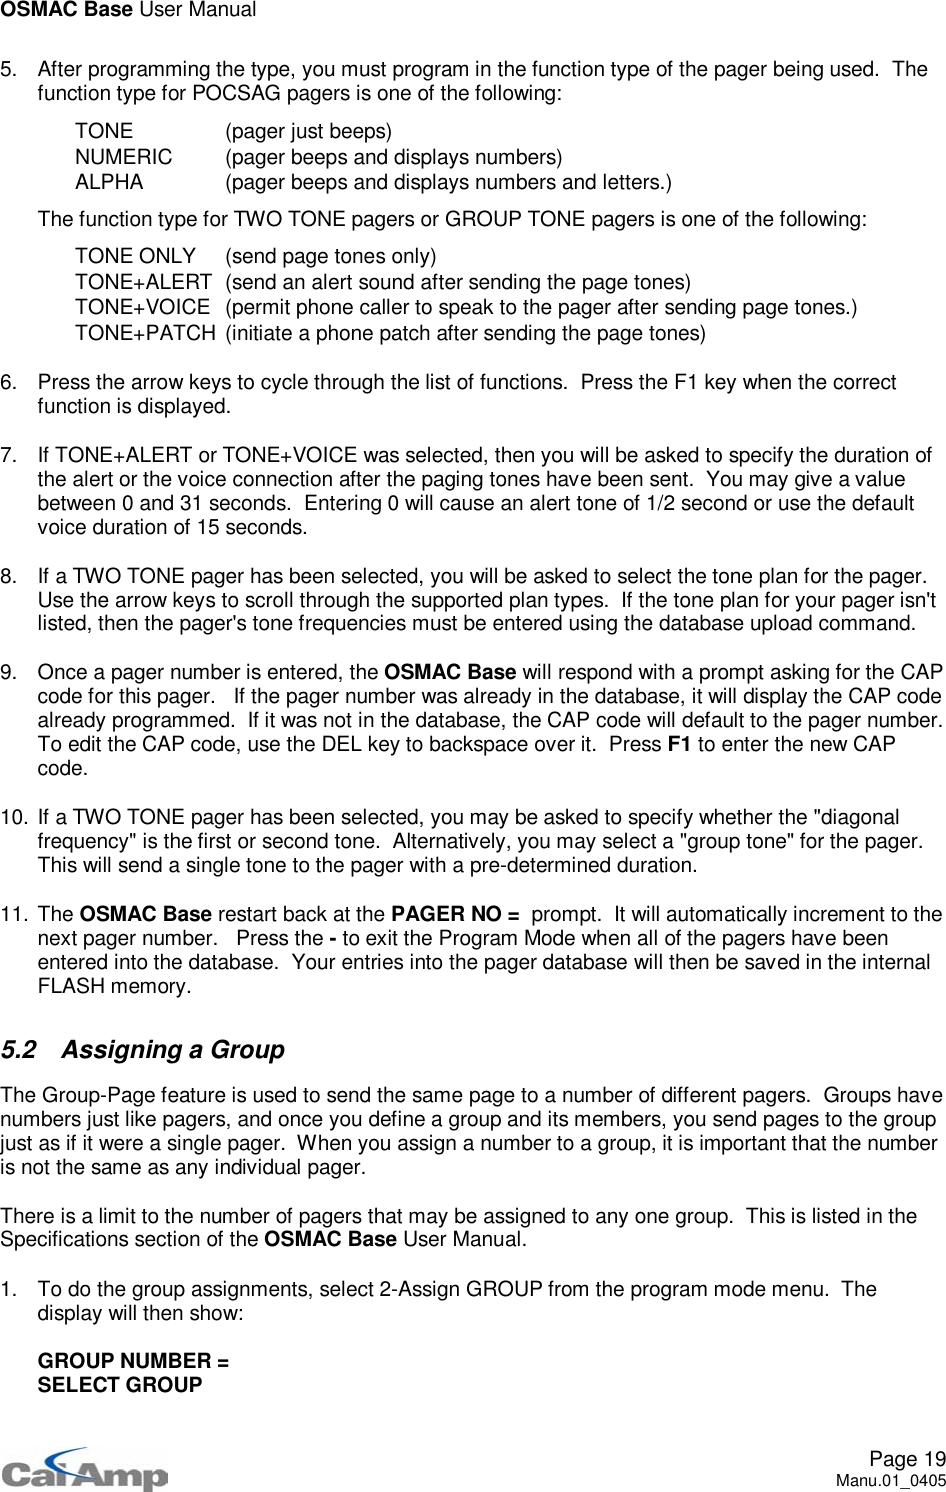 OSMAC Base User ManualPage 19Manu.01_04055. After programming the type, you must program in the function type of the pager being used. Thefunction type for POCSAG pagers is one of the following: TONE (pager just beeps) NUMERIC (pager beeps and displays numbers) ALPHA (pager beeps and displays numbers and letters.)The function type for TWO TONE pagers or GROUP TONE pagers is one of the following: TONE ONLY (send page tones only) TONE+ALERT (send an alert sound after sending the page tones) TONE+VOICE (permit phone caller to speak to the pager after sending page tones.) TONE+PATCH (initiate a phone patch after sending the page tones)6. Press the arrow keys to cycle through the list of functions. Press the F1 key when the correctfunction is displayed.7. If TONE+ALERT or TONE+VOICE was selected, then you will be asked to specify the duration ofthe alert or the voice connection after the paging tones have been sent. You may give a valuebetween 0 and 31 seconds. Entering 0 will cause an alert tone of 1/2 second or use the defaultvoice duration of 15 seconds.8. If a TWO TONE pager has been selected, you will be asked to select the tone plan for the pager.Use the arrow keys to scroll through the supported plan types. If the tone plan for your pager isn&apos;tlisted, then the pager&apos;s tone frequencies must be entered using the database upload command.9. Once a pager number is entered, the OSMAC Base will respond with a prompt asking for the CAPcode for this pager. If the pager number was already in the database, it will display the CAP codealready programmed. If it was not in the database, the CAP code will default to the pager number.To edit the CAP code, use the DEL key to backspace over it. Press F1 to enter the new CAPcode.10. If a TWO TONE pager has been selected, you may be asked to specify whether the &quot;diagonalfrequency&quot; is the first or second tone. Alternatively, you may select a &quot;group tone&quot; for the pager.This will send a single tone to the pager with a pre-determined duration.11. The OSMAC Base restart back at the PAGER NO = prompt. It will automatically increment to thenext pager number. Press the -to exit the Program Mode when all of the pagers have beenentered into the database. Your entries into the pager database will then be saved in the internalFLASH memory.5.2 Assigning a GroupThe Group-Page feature is used to send the same page to a number of different pagers. Groups havenumbers just like pagers, and once you define a group and its members, you send pages to the groupjust as if it were a single pager. When you assign a number to a group, it is important that the numberis not the same as any individual pager.There is a limit to the number of pagers that may be assigned to any one group. This is listed in theSpecifications section of the OSMAC Base User Manual.1. To do the group assignments, select 2-Assign GROUP from the program mode menu. Thedisplay will then show:GROUP NUMBER =SELECT GROUP